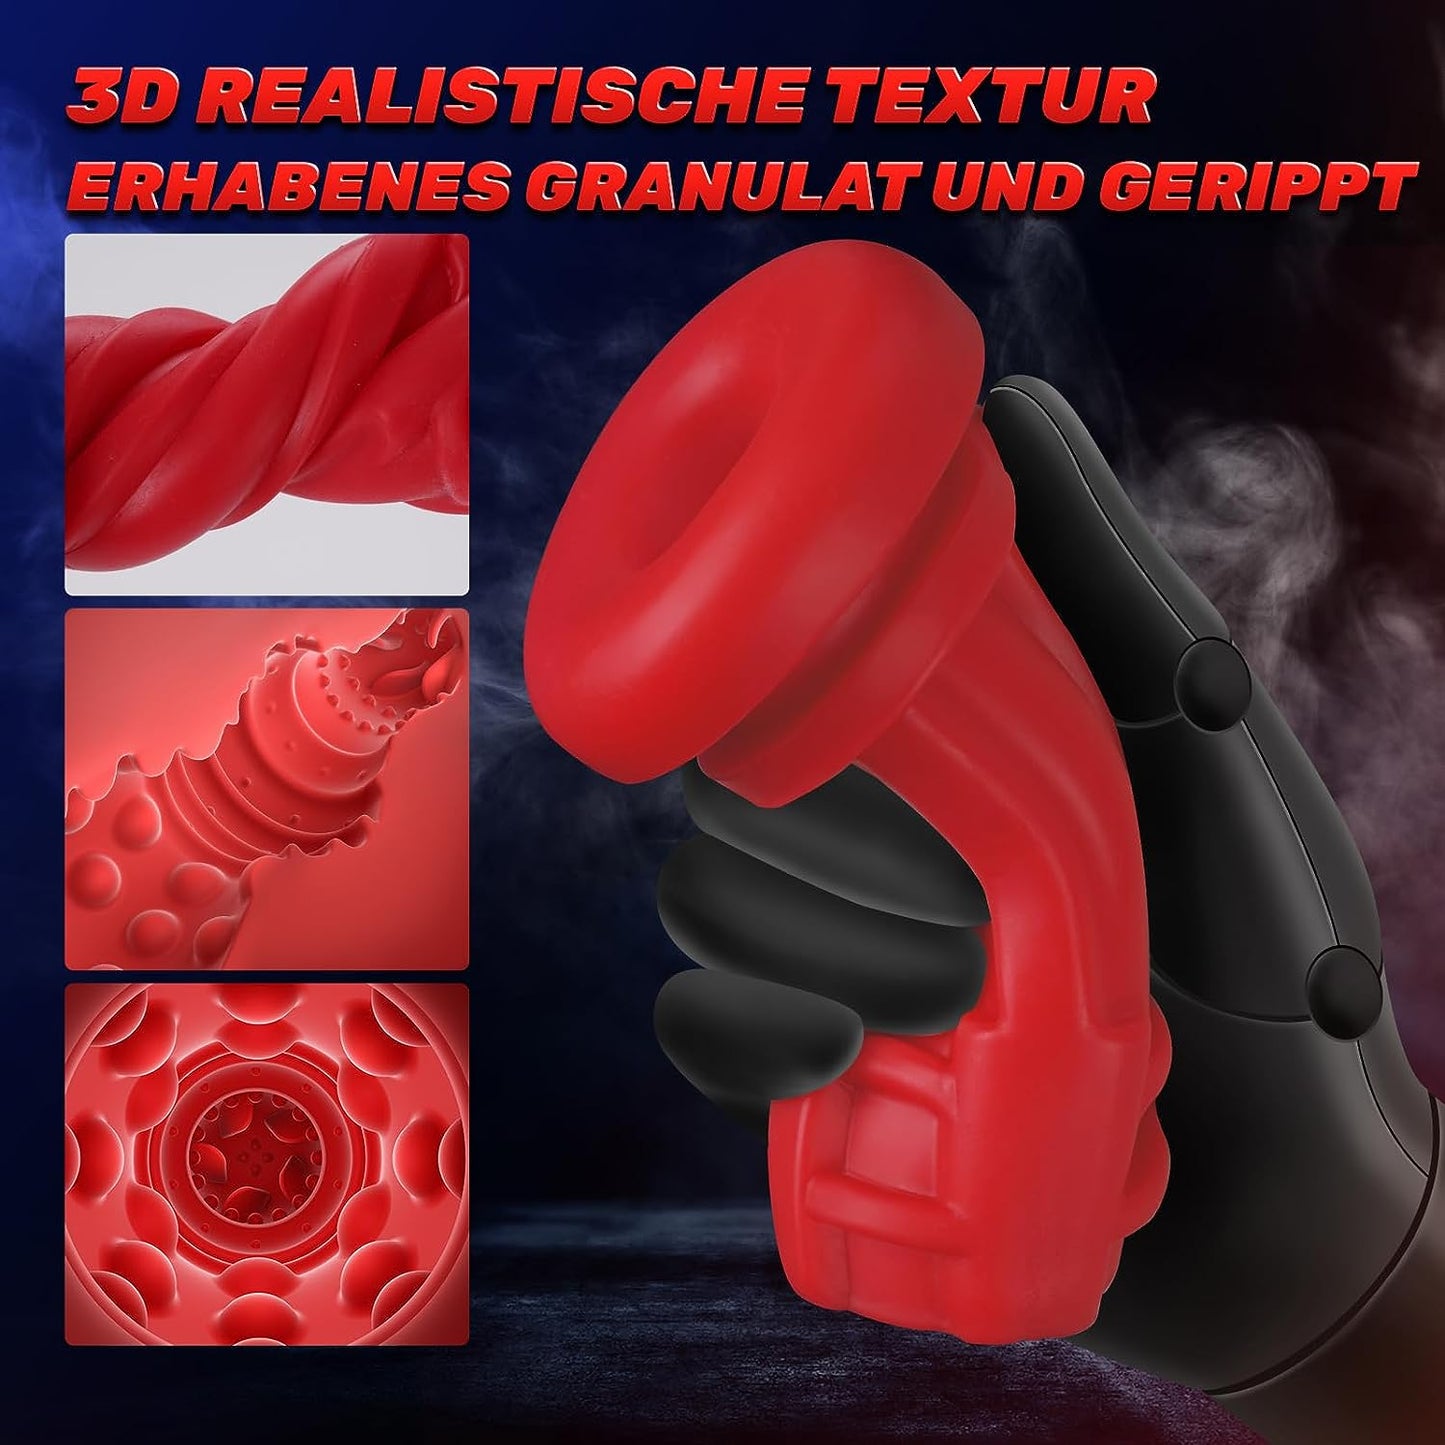 LCD display electric masturbator with 9 suction modes and vibration modes